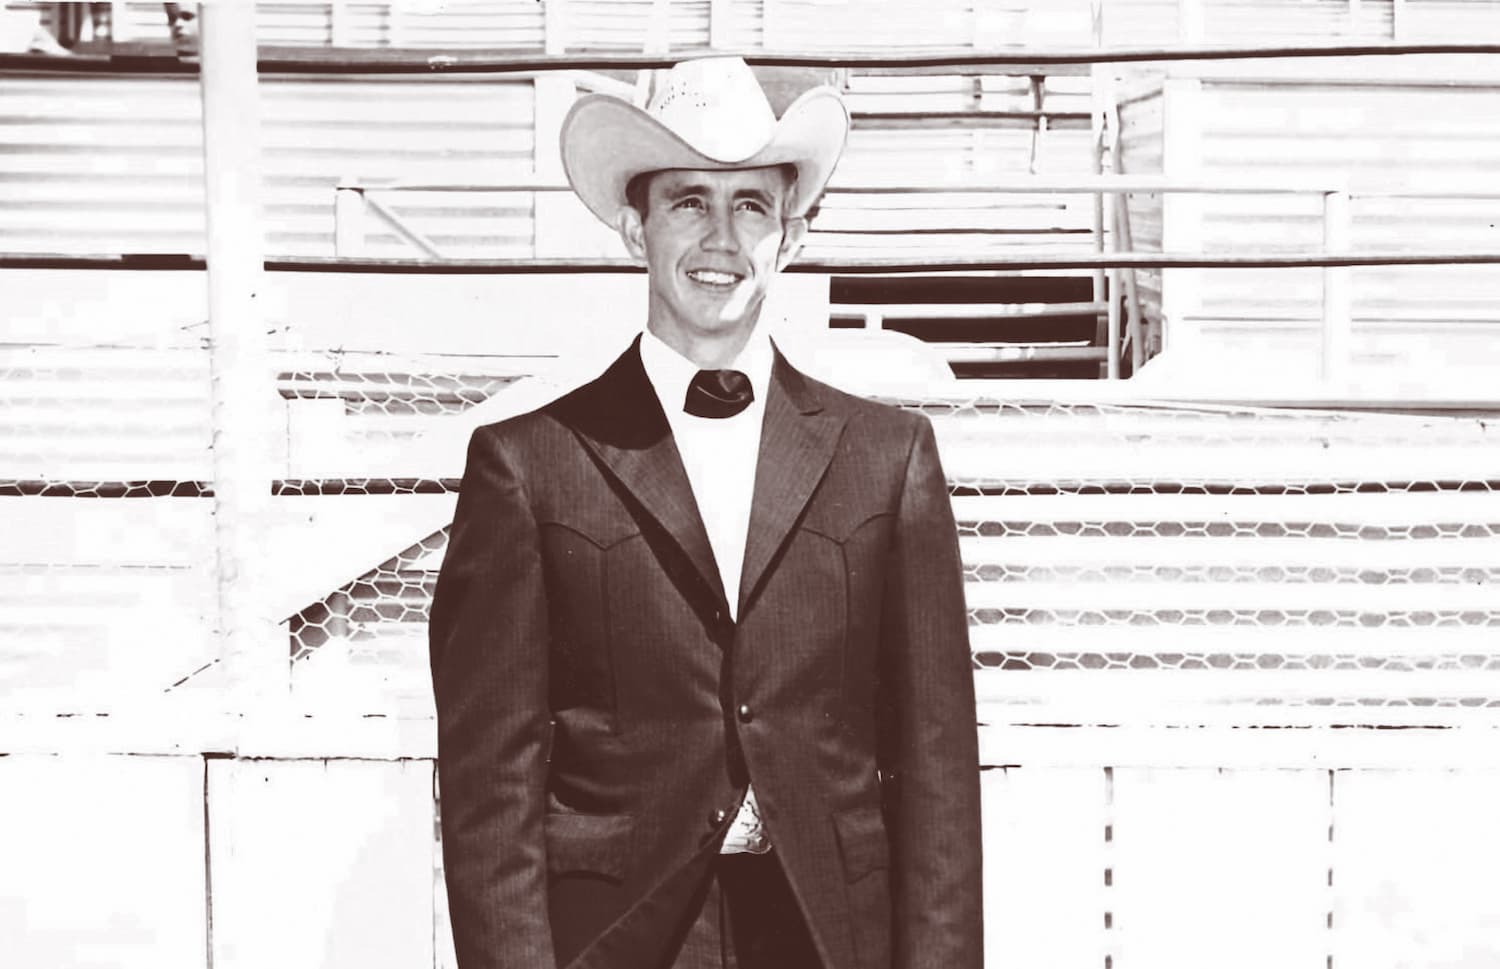 A young Bubba Miller poses at the rodeo in a dapper suit and cowboy hat.